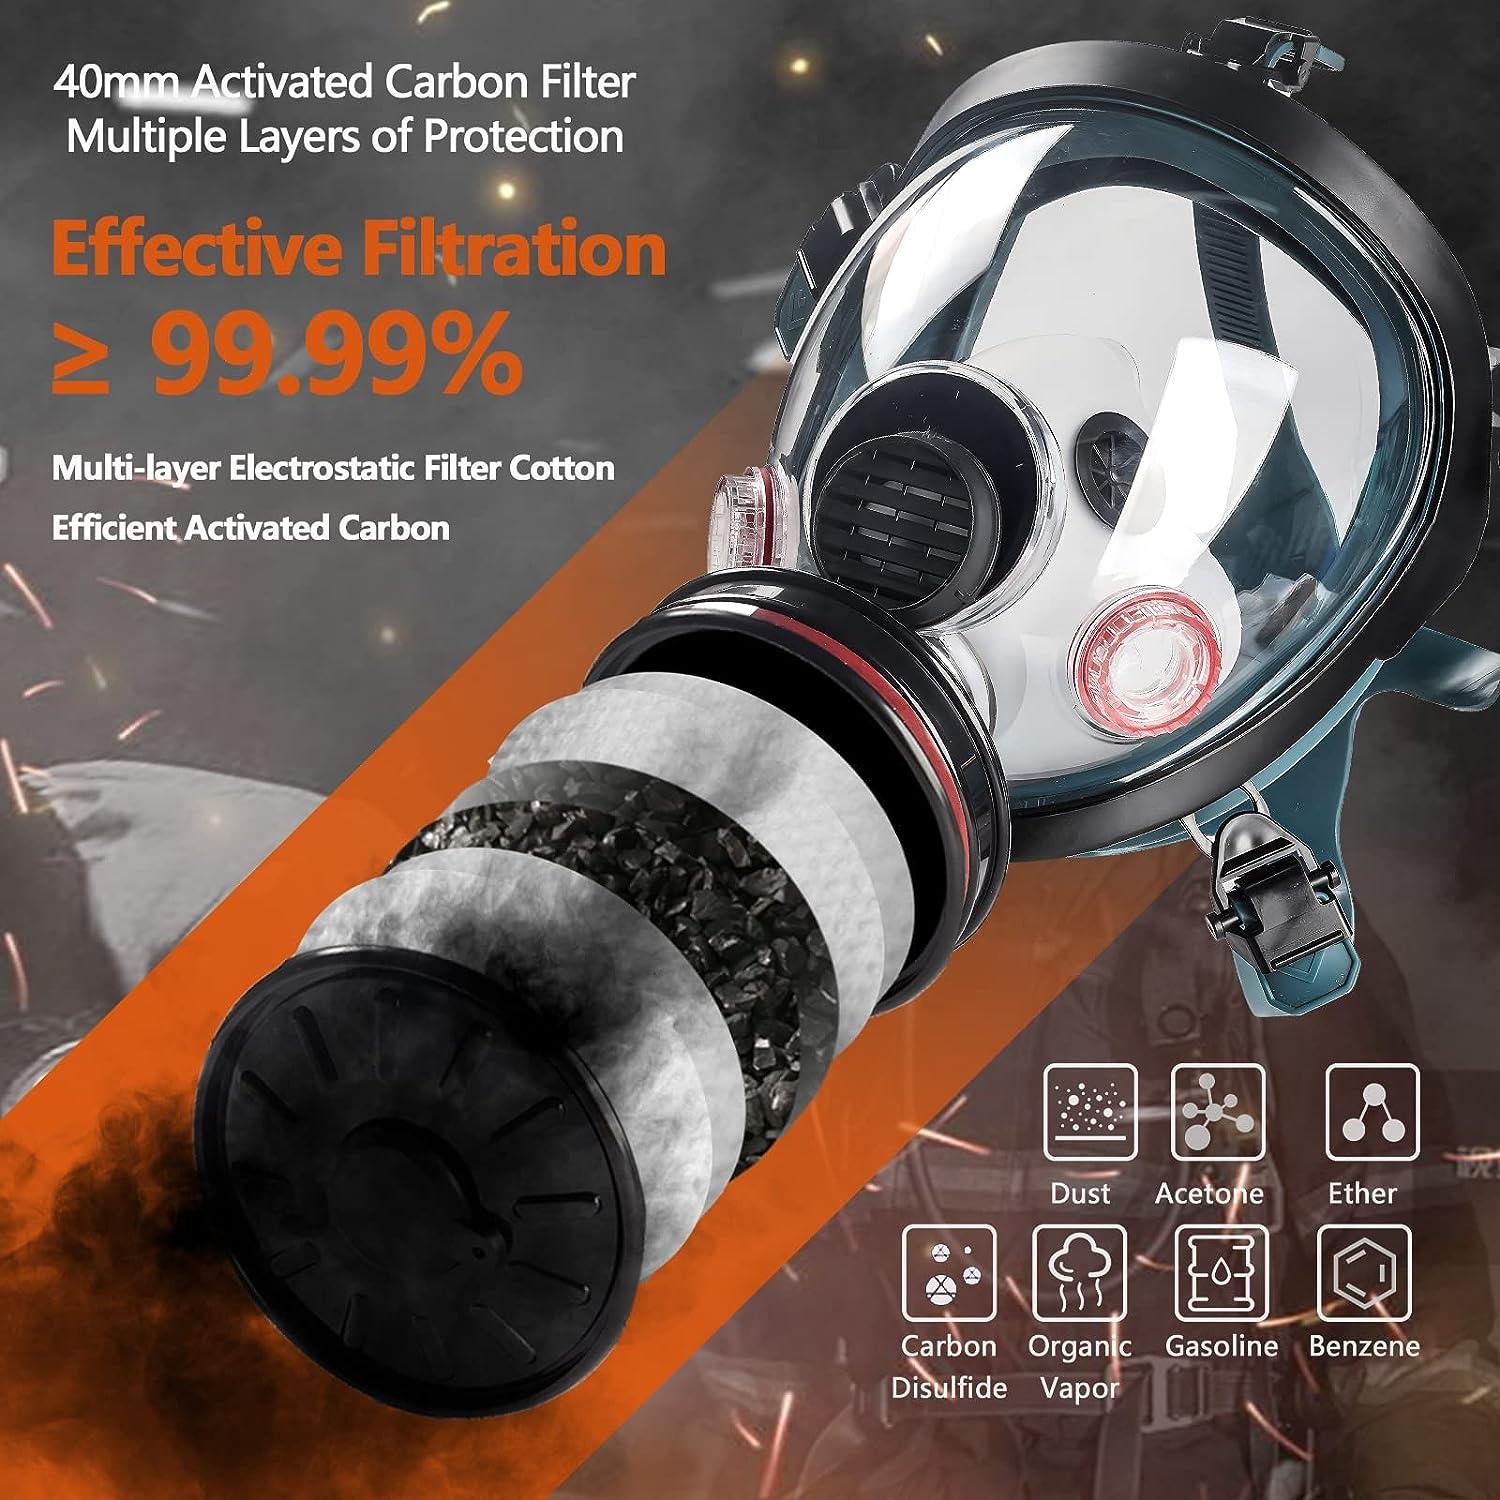 Gas Masks Survival Nuclear and Chemical, Gas Mask with 40mm Activated  Carbon Filter, Full Face Respirator Mask for Gases, Chemicals, Vapors,  Spray